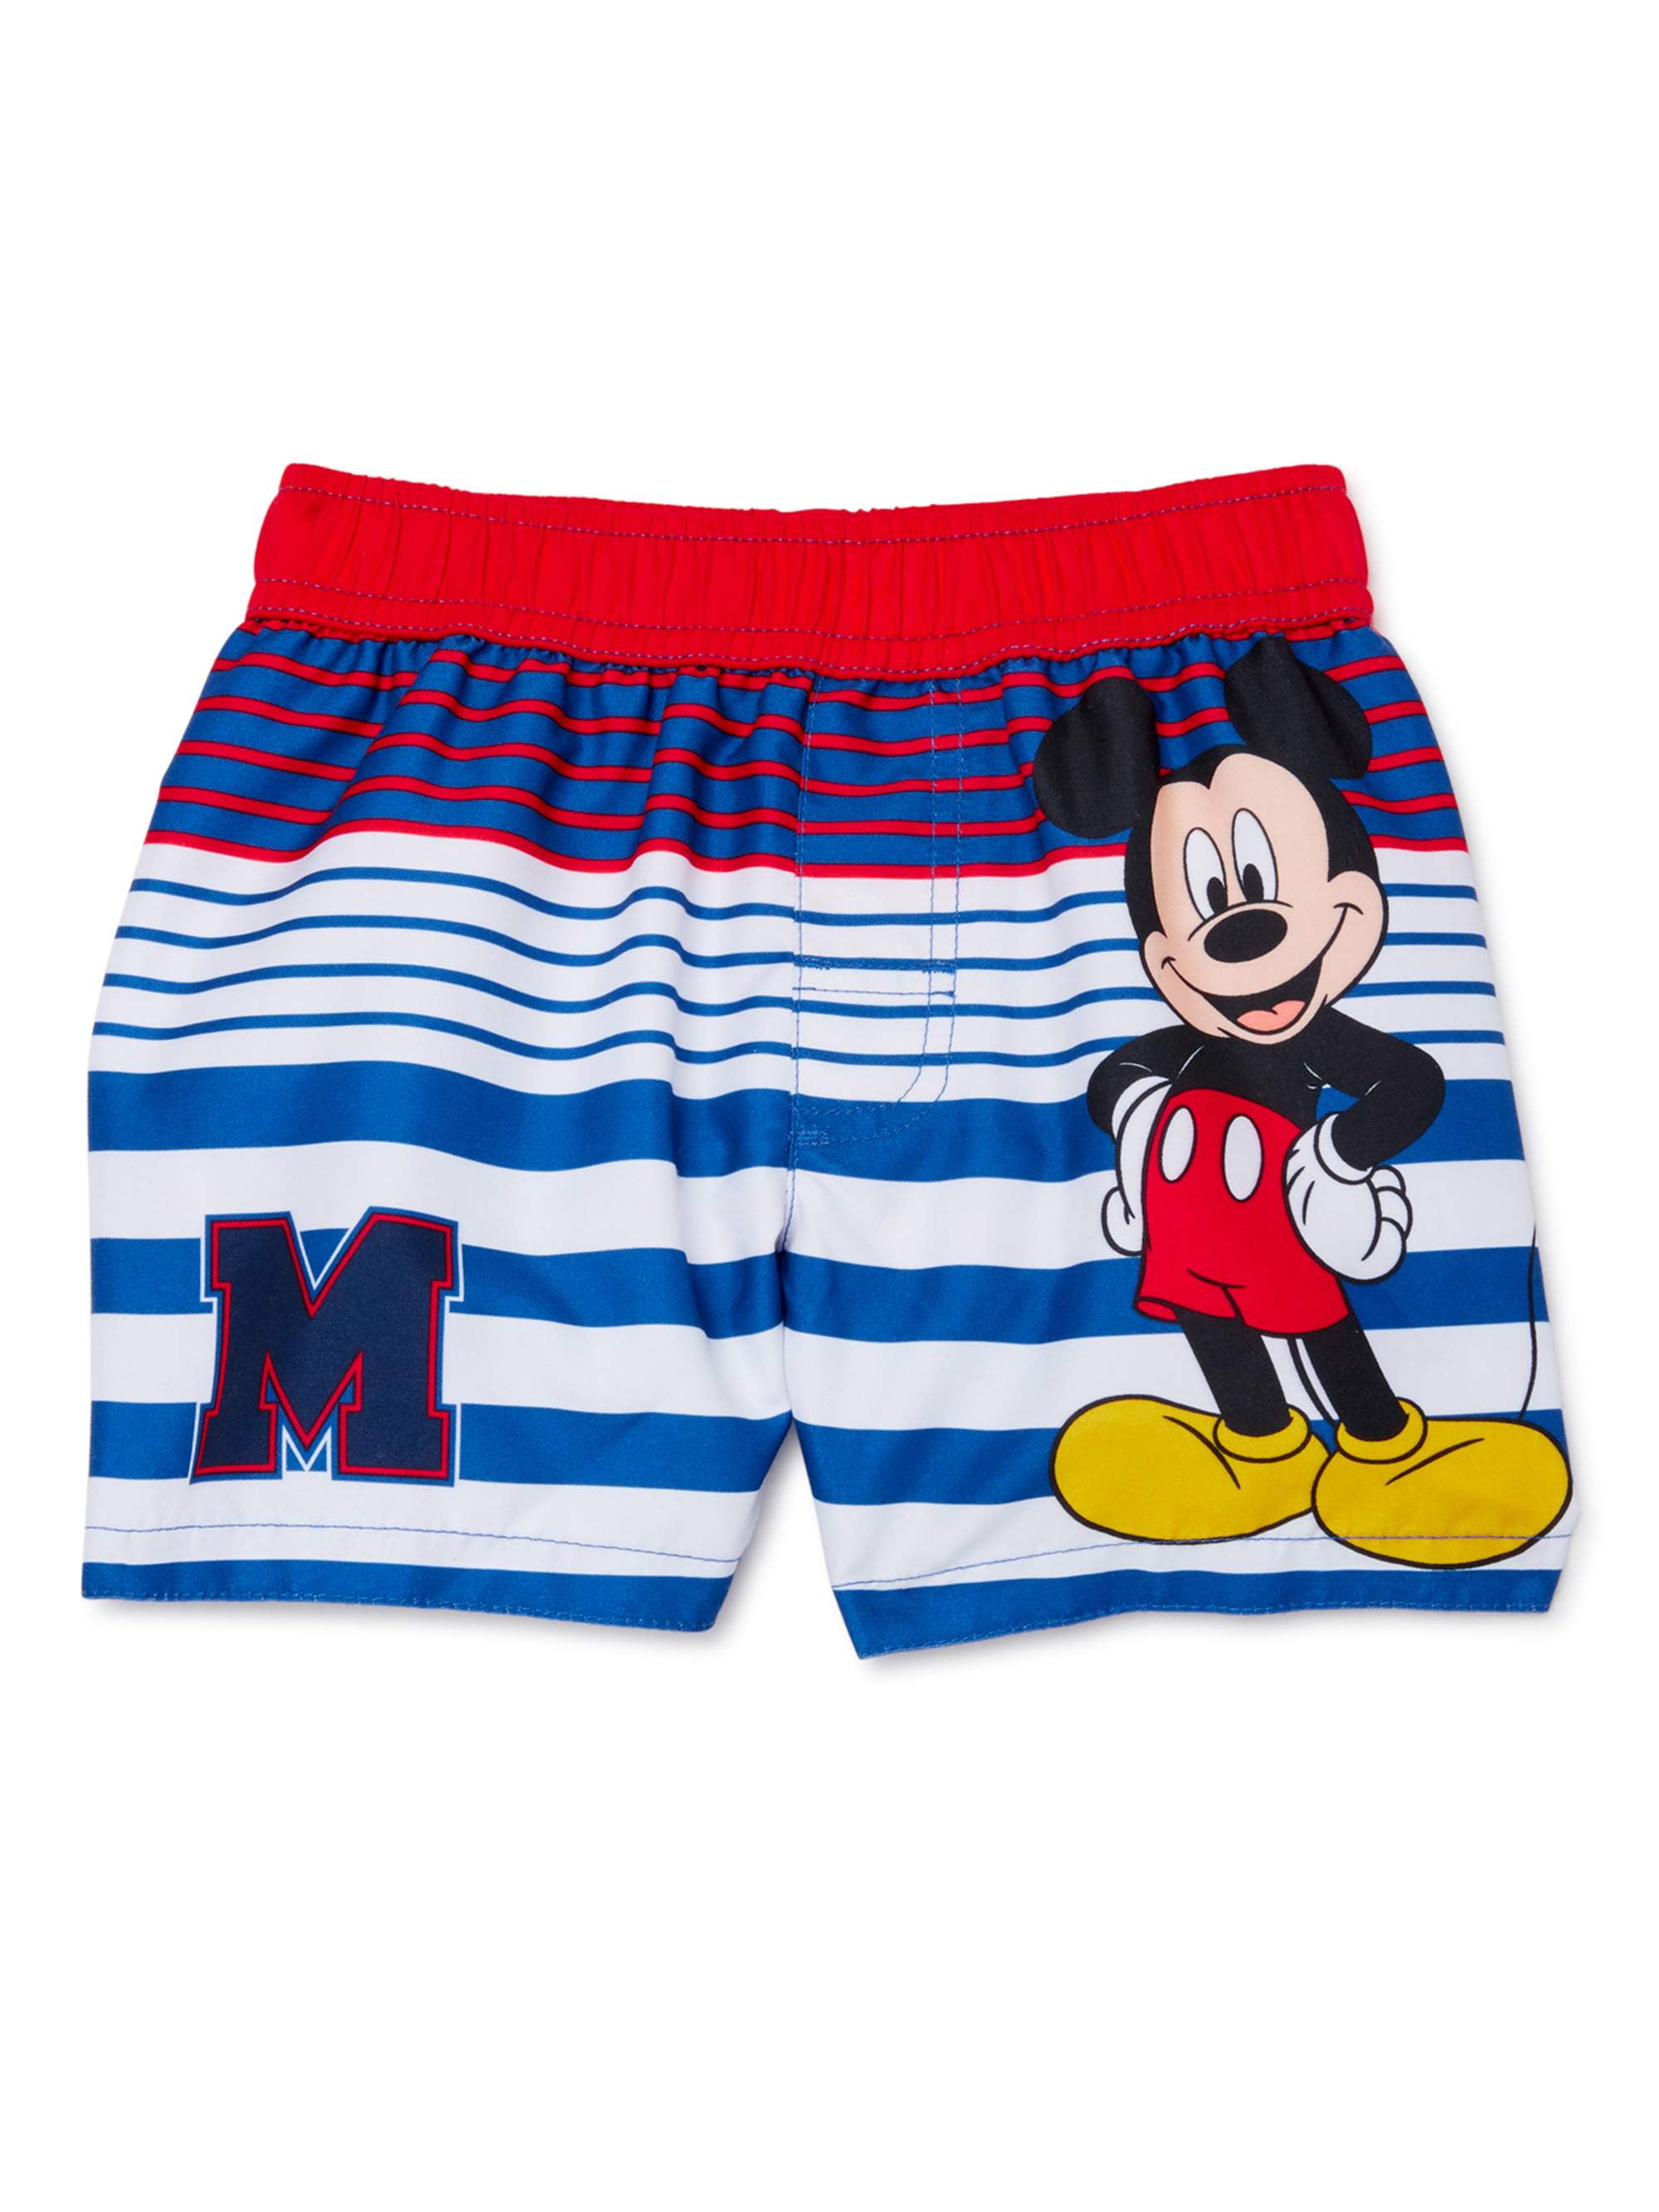 Boys Paw Patrol Shorts Swimming Trunks Beach Holiday Kids Ages 1.5-5 Years 